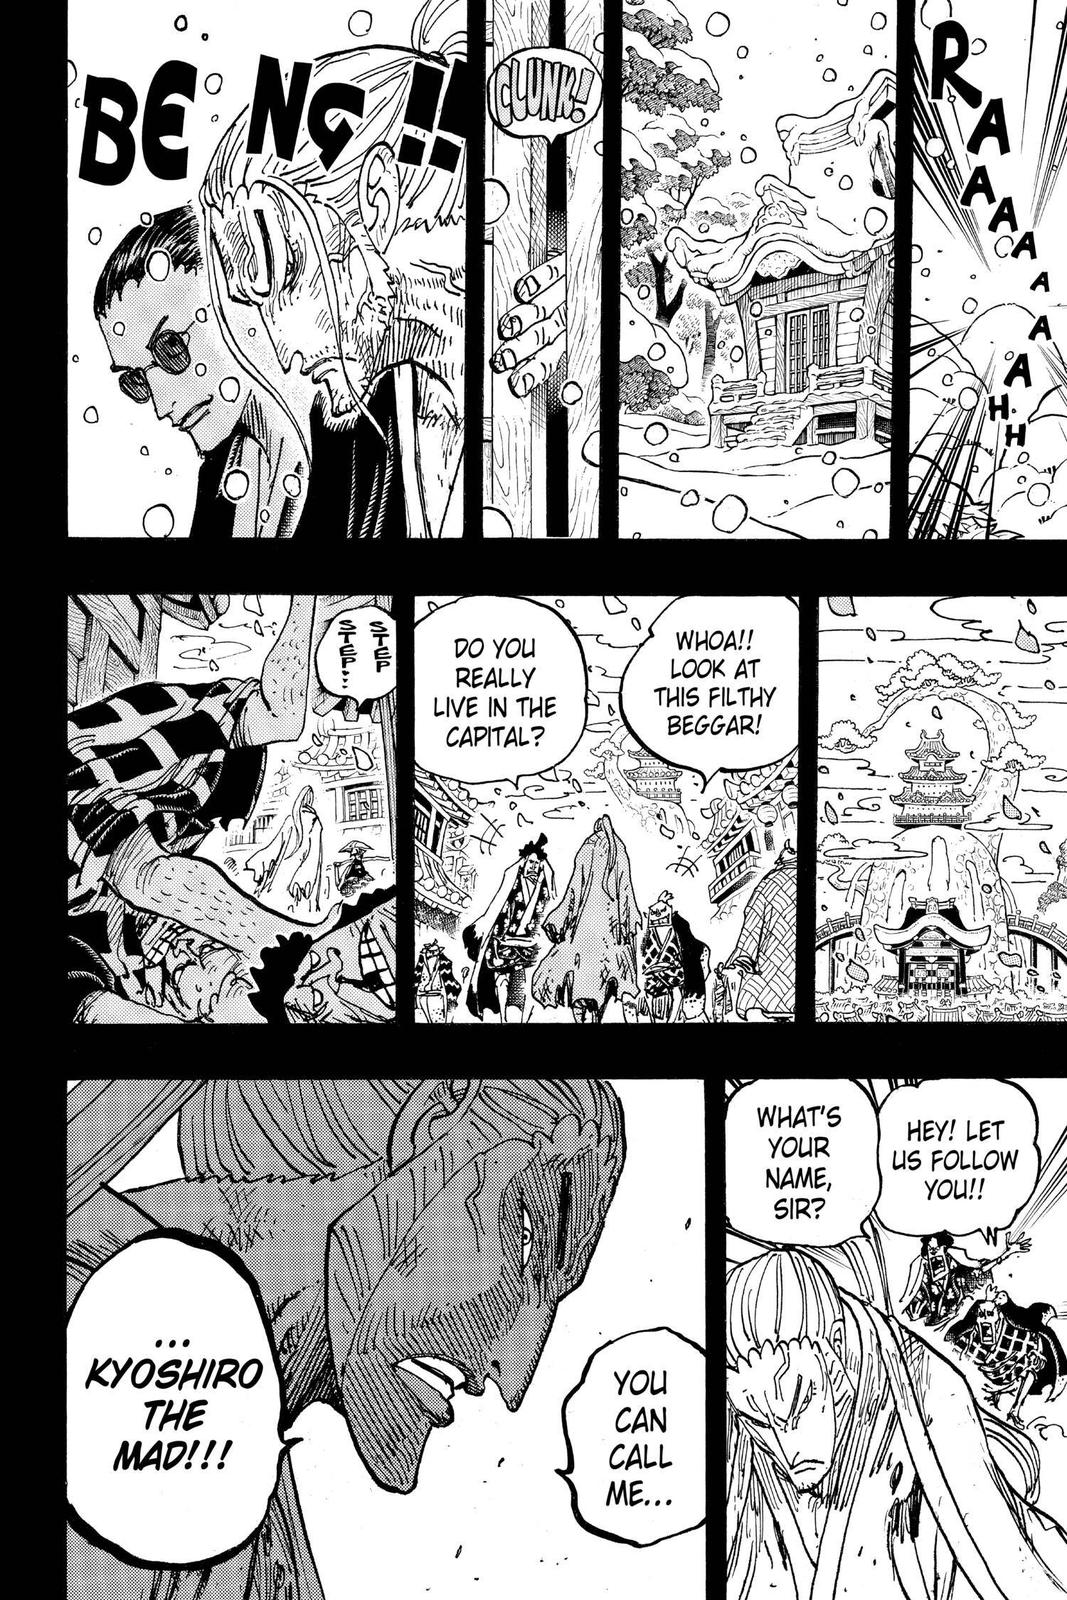  One Piece, Chapter 973 image 14